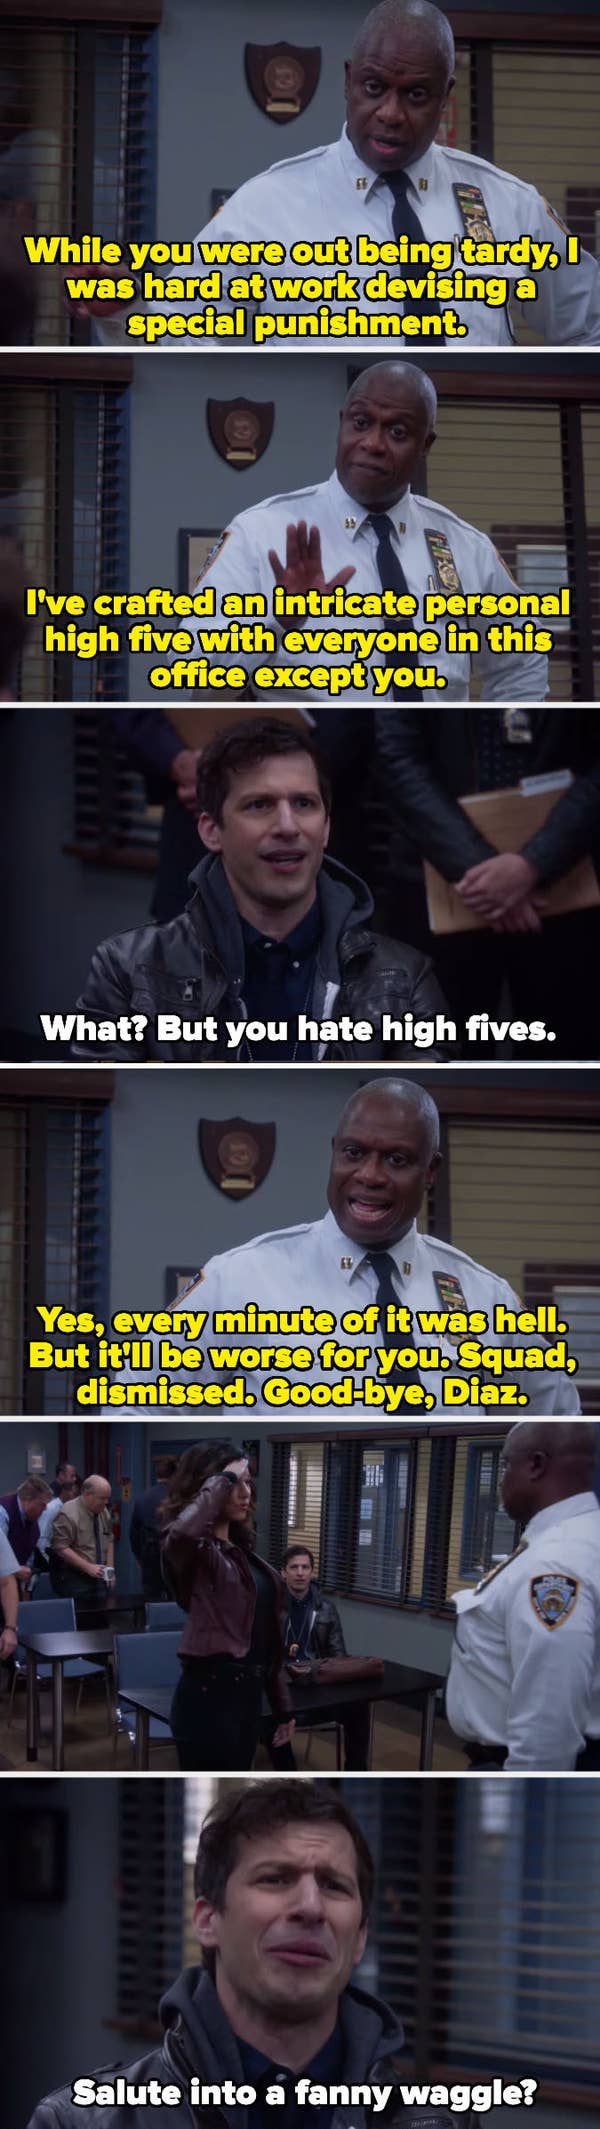 Brooklyn Nine-Nine: 23 Best Cold Opens That Are Hilarious - FandomWire